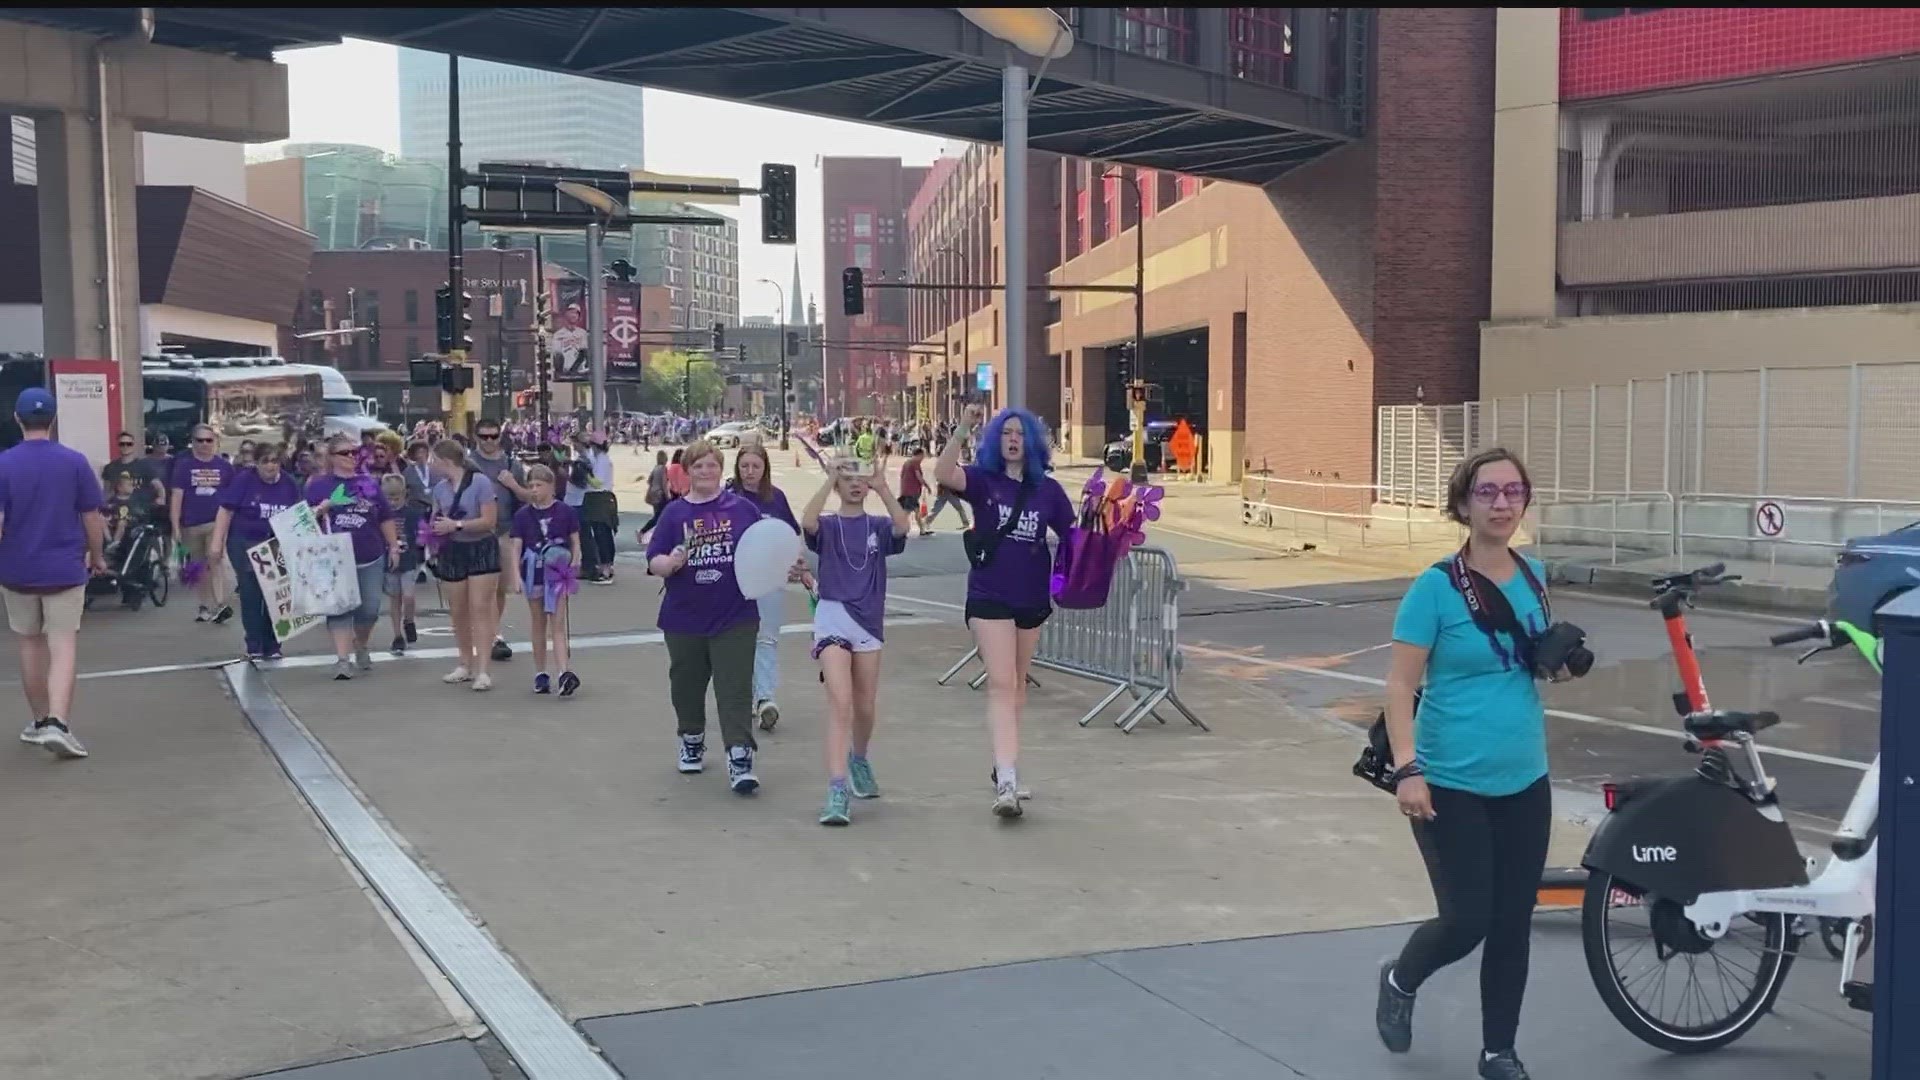 Walkers raised money for the Alzheimer’s Association, which funds research and supports those living with Alzheimer’s or another dementia and their caregivers.